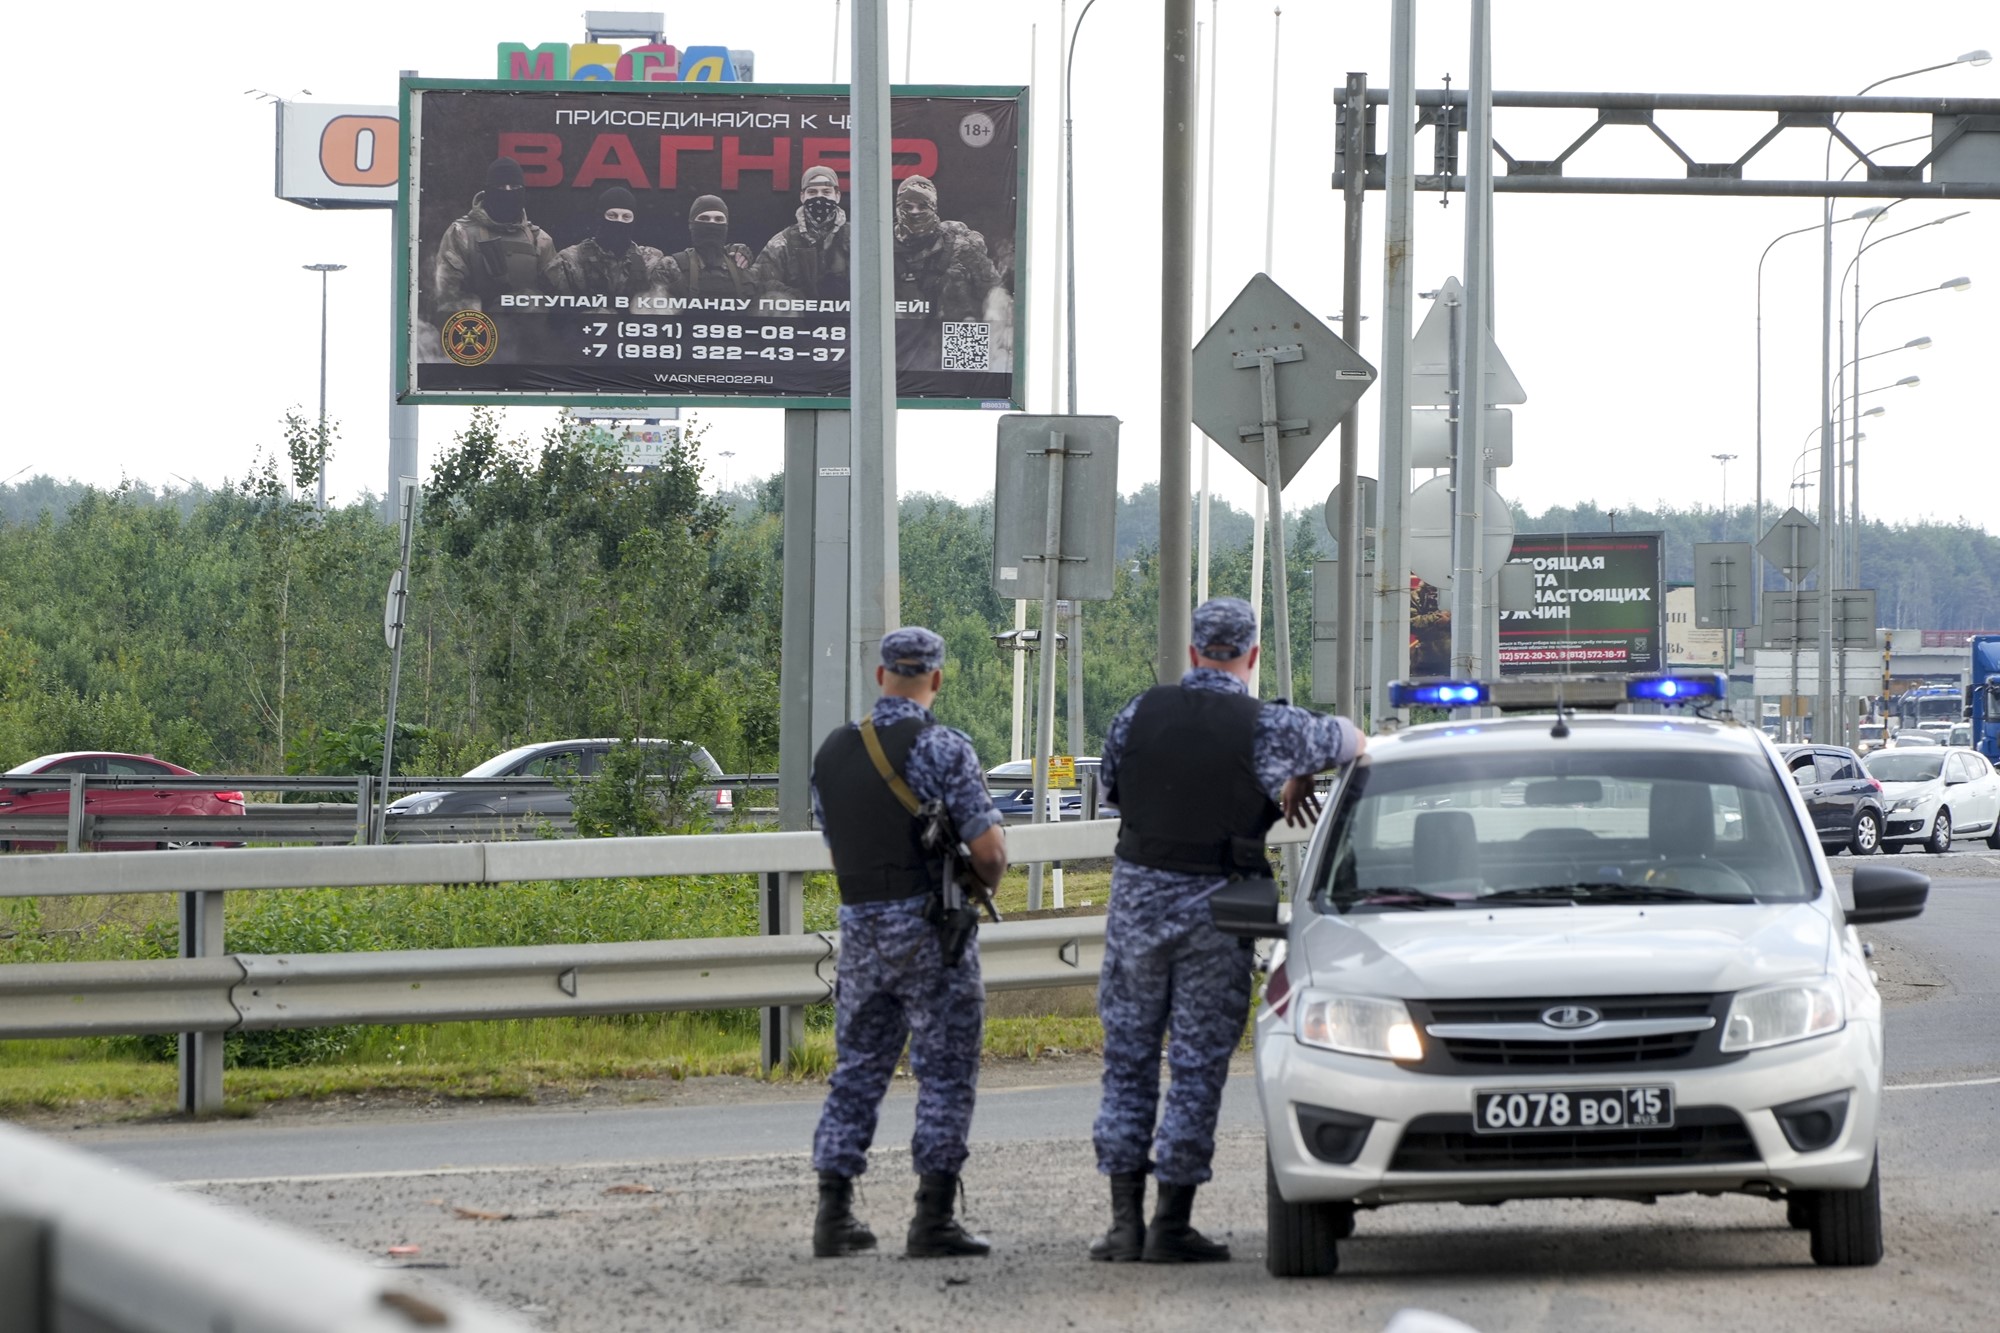 Policemen guard an area in front of a billboard reading "Join us at Wagner."